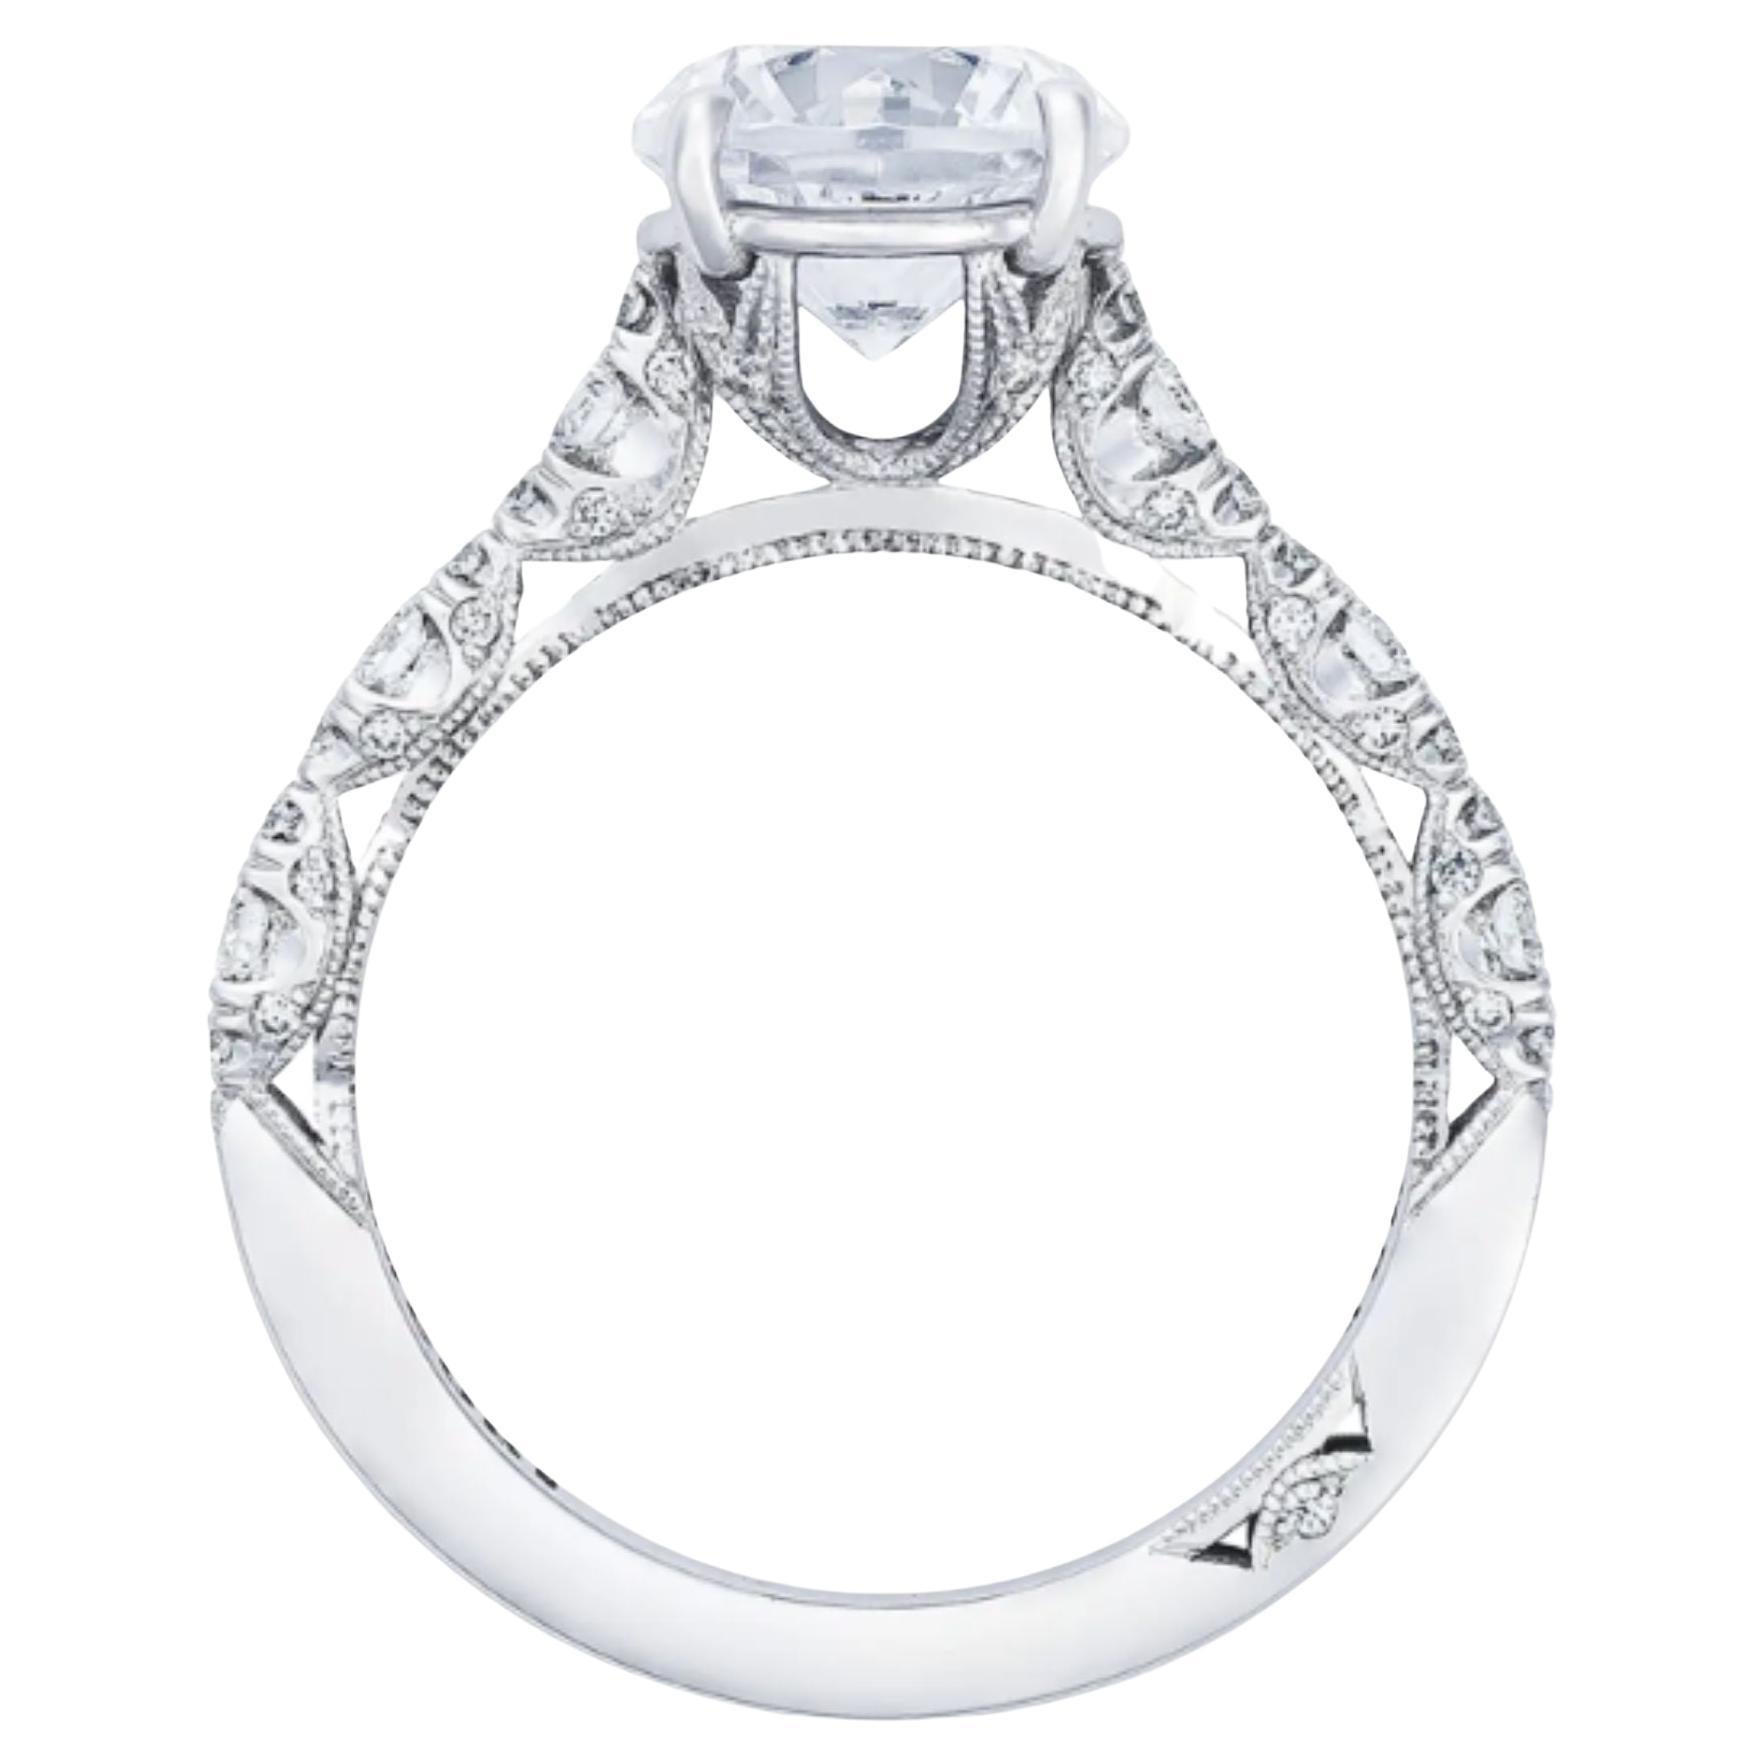 Beautiful marquise shapes with brilliant graduating diamonds dance along this stunning engagement ring. The diamonds are placed in a French-cut setting, allowing more diamond brilliance from every angle to bring light to the round center. The